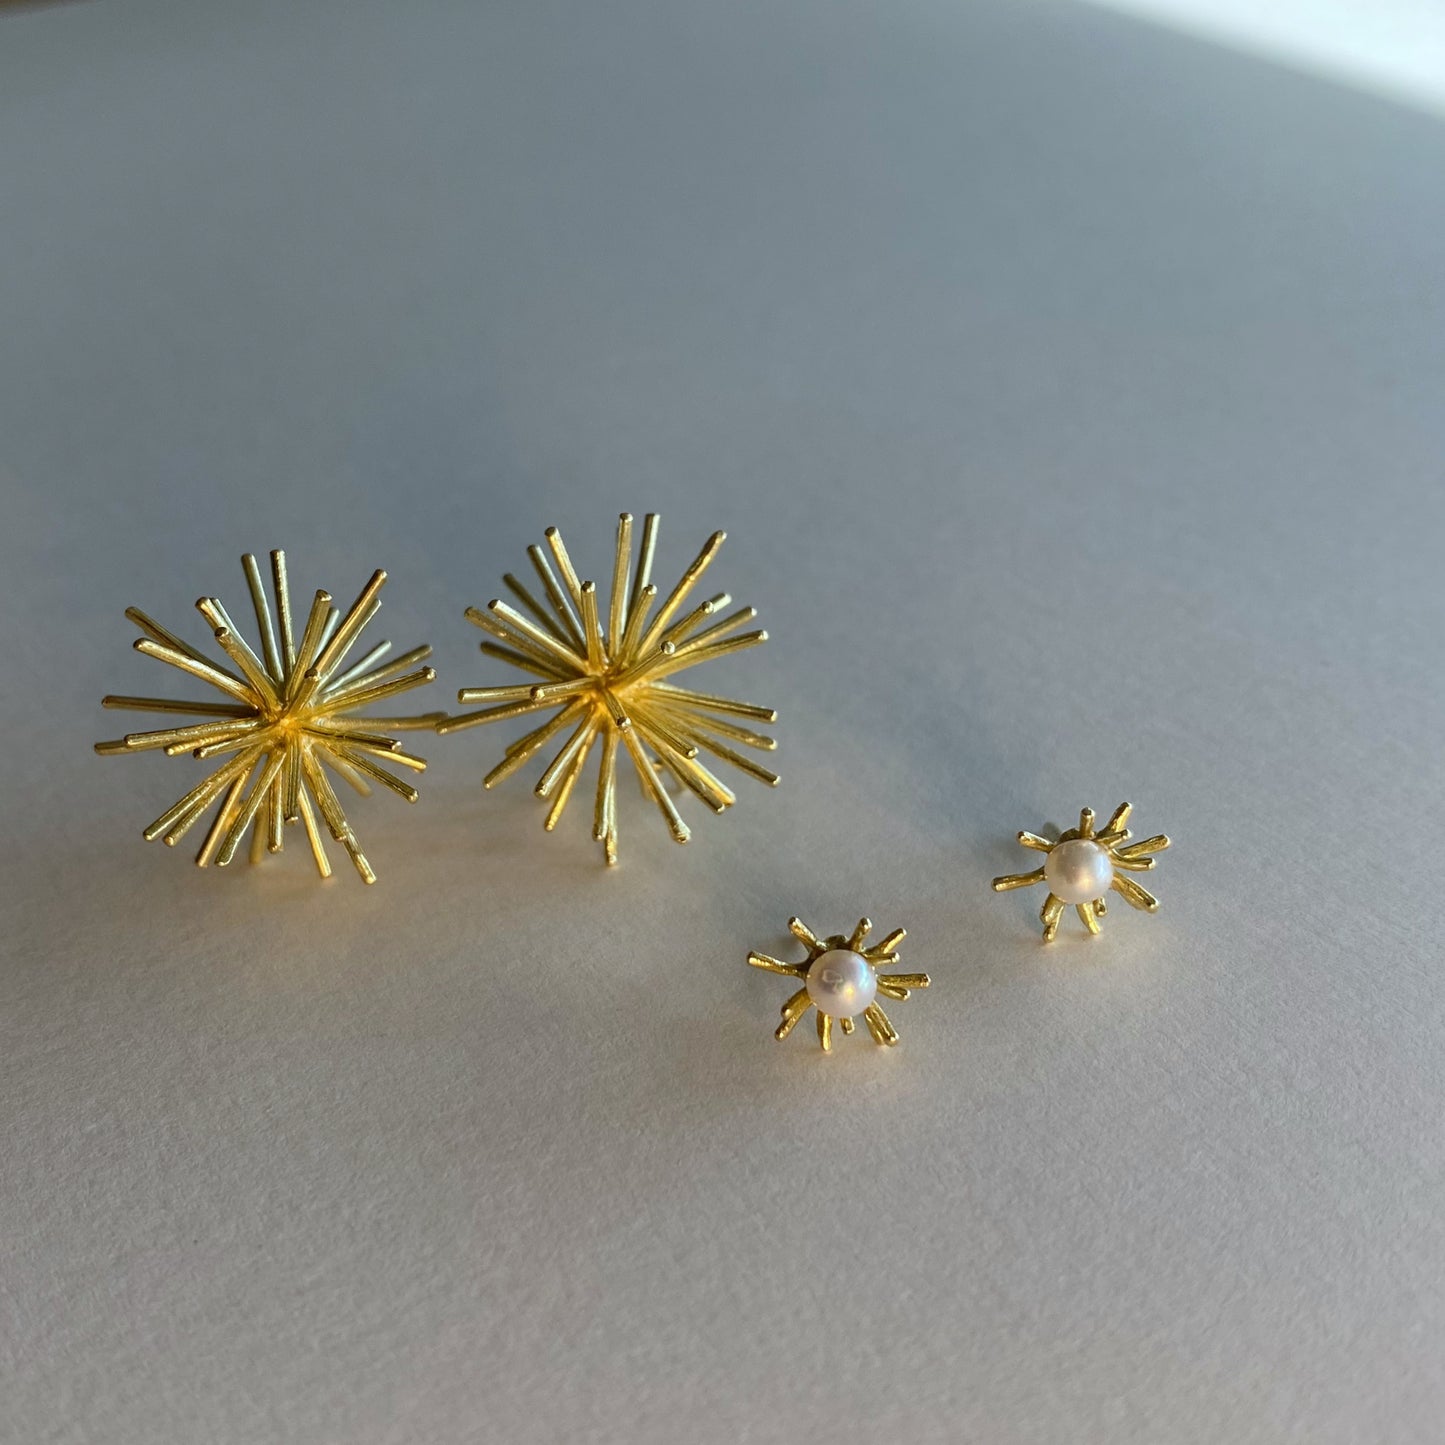 Sea Urchin earrings in solid 18 kt gold with natural pearls. Compare the smallest and the largest size of the collection.